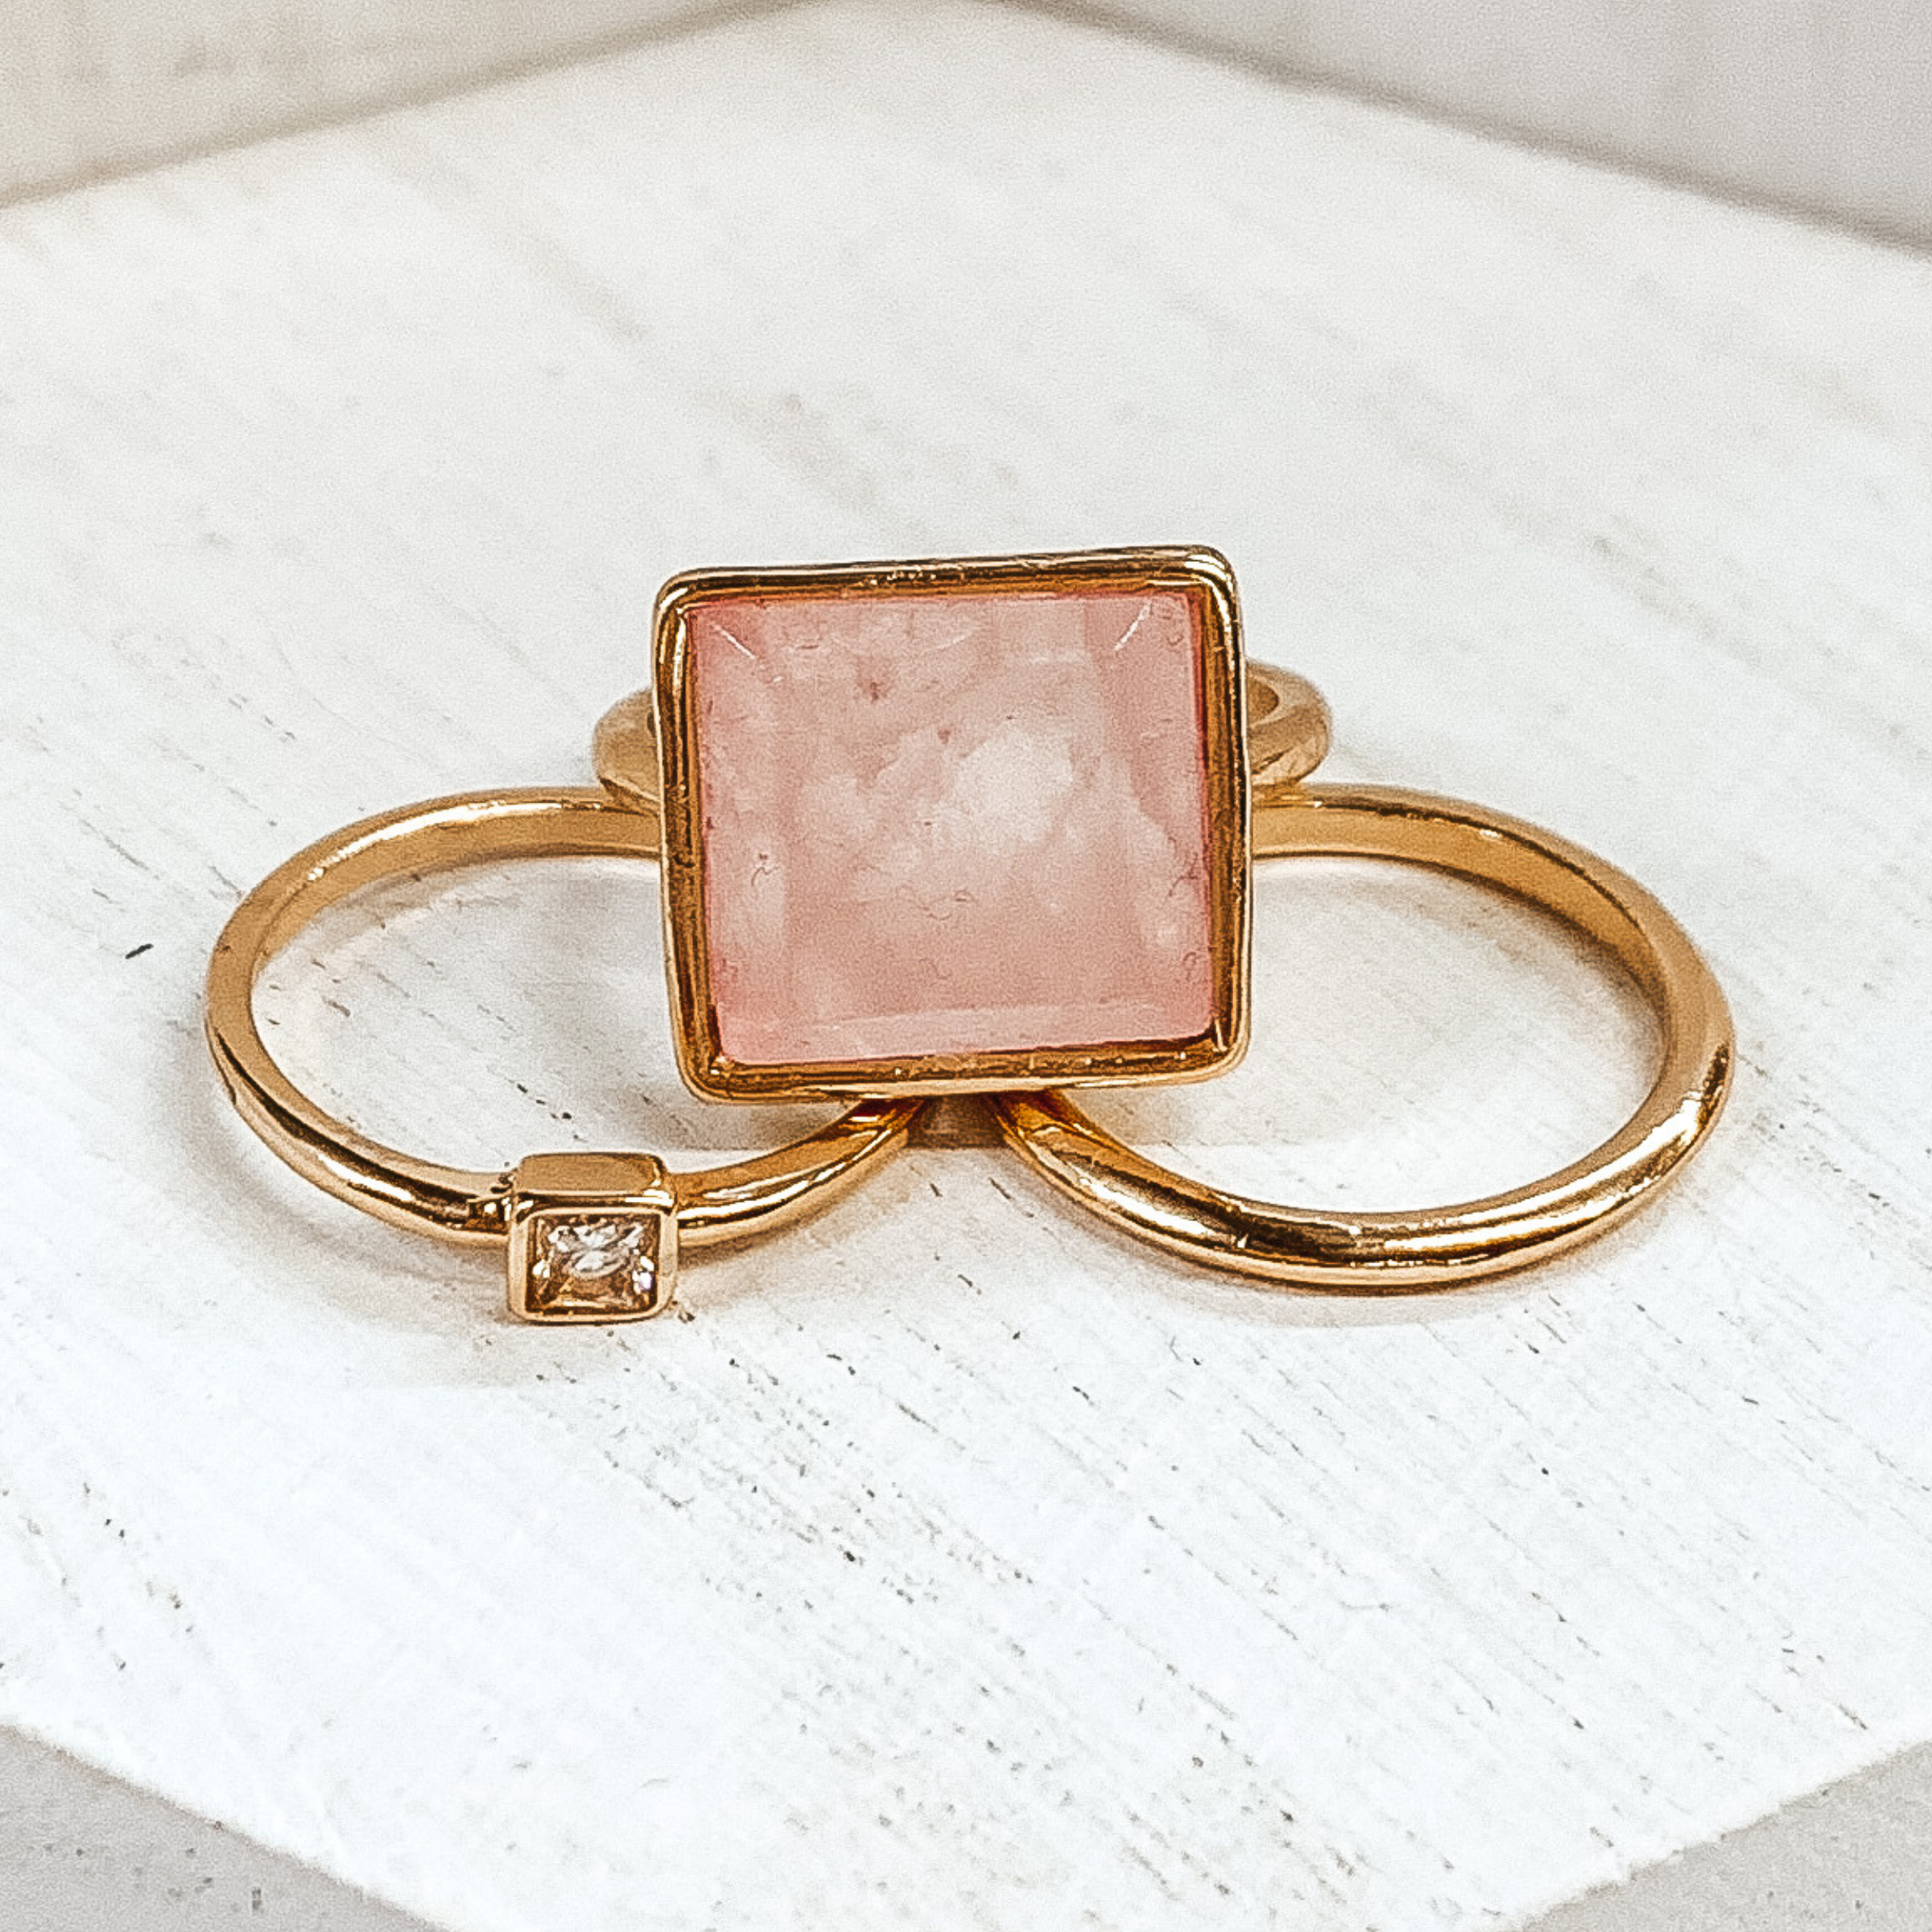 Set of three gold rings. One ring is a plain gold band. Another has a small square pendant with a center crystal. The third ring has a big, light pink pendant. These rings are pictured on a white background.  